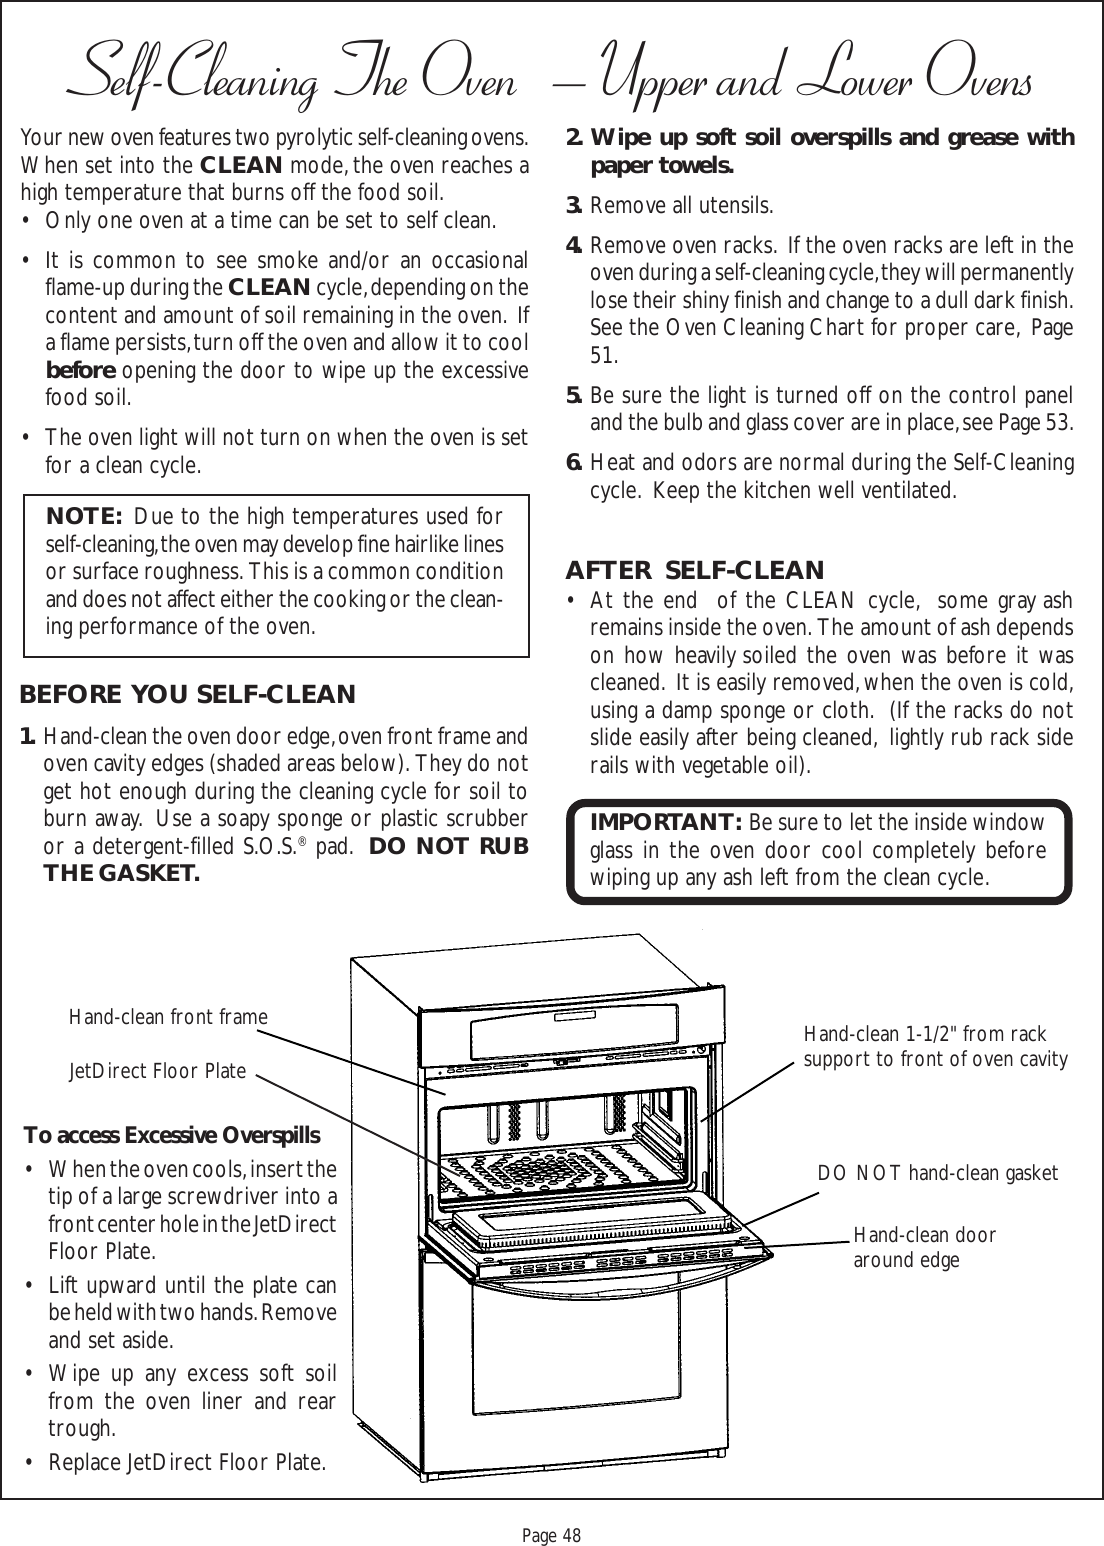 Proof 9-21-99Page 48Self-Cleaning The Oven   – Upper and Lower OvensHand-clean dooraround edgeHand-clean 1-1/2&quot; from racksupport to front of oven cavityDO NOT hand-clean gasketHand-clean front frameYour new oven features two pyrolytic self-cleaning ovens.When set into the CLEAN mode, the oven reaches ahigh temperature that burns off the food soil.• Only one oven at a time can be set to self clean.• It is common to see smoke and/or an occasionalflame-up during the CLEAN cycle, depending on thecontent and amount of soil remaining in the oven.  Ifa flame persists, turn off the oven and allow it to coolbefore opening the door to wipe up the excessivefood soil.• The oven light will not turn on when the oven is setfor a clean cycle.BEFORE  YOU SELF-CLEAN1. Hand-clean the oven door edge, oven front frame andoven cavity edges (shaded areas below).  They do notget hot enough during the cleaning cycle for soil toburn away.  Use a soapy sponge or plastic scrubberor a detergent-filled S.O.S.® pad.  DO NOT RUBTHE GASKET.NOTE:  Due to the high temperatures used forself-cleaning, the oven may develop fine hairlike linesor surface roughness.  This is a common conditionand does not affect either the cooking or the clean-ing performance of the oven.2 . Wipe up soft soil overspills and grease withpaper towels.3. Remove all utensils.4. Remove oven racks.  If the oven racks are left in theoven during a self-cleaning cycle, they will permanentlylose their shiny finish and change to a dull dark finish.See the Oven Cleaning Chart for proper care,  Page51.5. Be sure the light is turned off on the control paneland the bulb and glass cover are in place, see Page 53.6. Heat and odors are normal during the Self-Cleaningcycle.  Keep the kitchen well ventilated.AFTER  SELF-CLEAN• At the end  of the CLEAN cycle,  some gray ashremains inside the oven.  The amount of ash dependson how heavily soiled the oven was before it wascleaned.  It is easily removed, when the oven is cold,using a damp sponge or cloth.  (If the racks do notslide easily after being cleaned,  lightly rub rack siderails with vegetable oil).IMPORTANT:  Be sure to let the inside windowglass in the oven door cool completely beforewiping up any ash left from the clean cycle.JetDirect Floor PlateTo access Excessive Overspills• When the oven cools, insert thetip of a large screwdriver into afront center hole in the JetDirectFloor Plate.• Lift upward until the plate canbe held with two hands. Removeand set aside.• Wipe up any excess soft soilfrom the oven liner and reartrough.• Replace JetDirect Floor Plate.